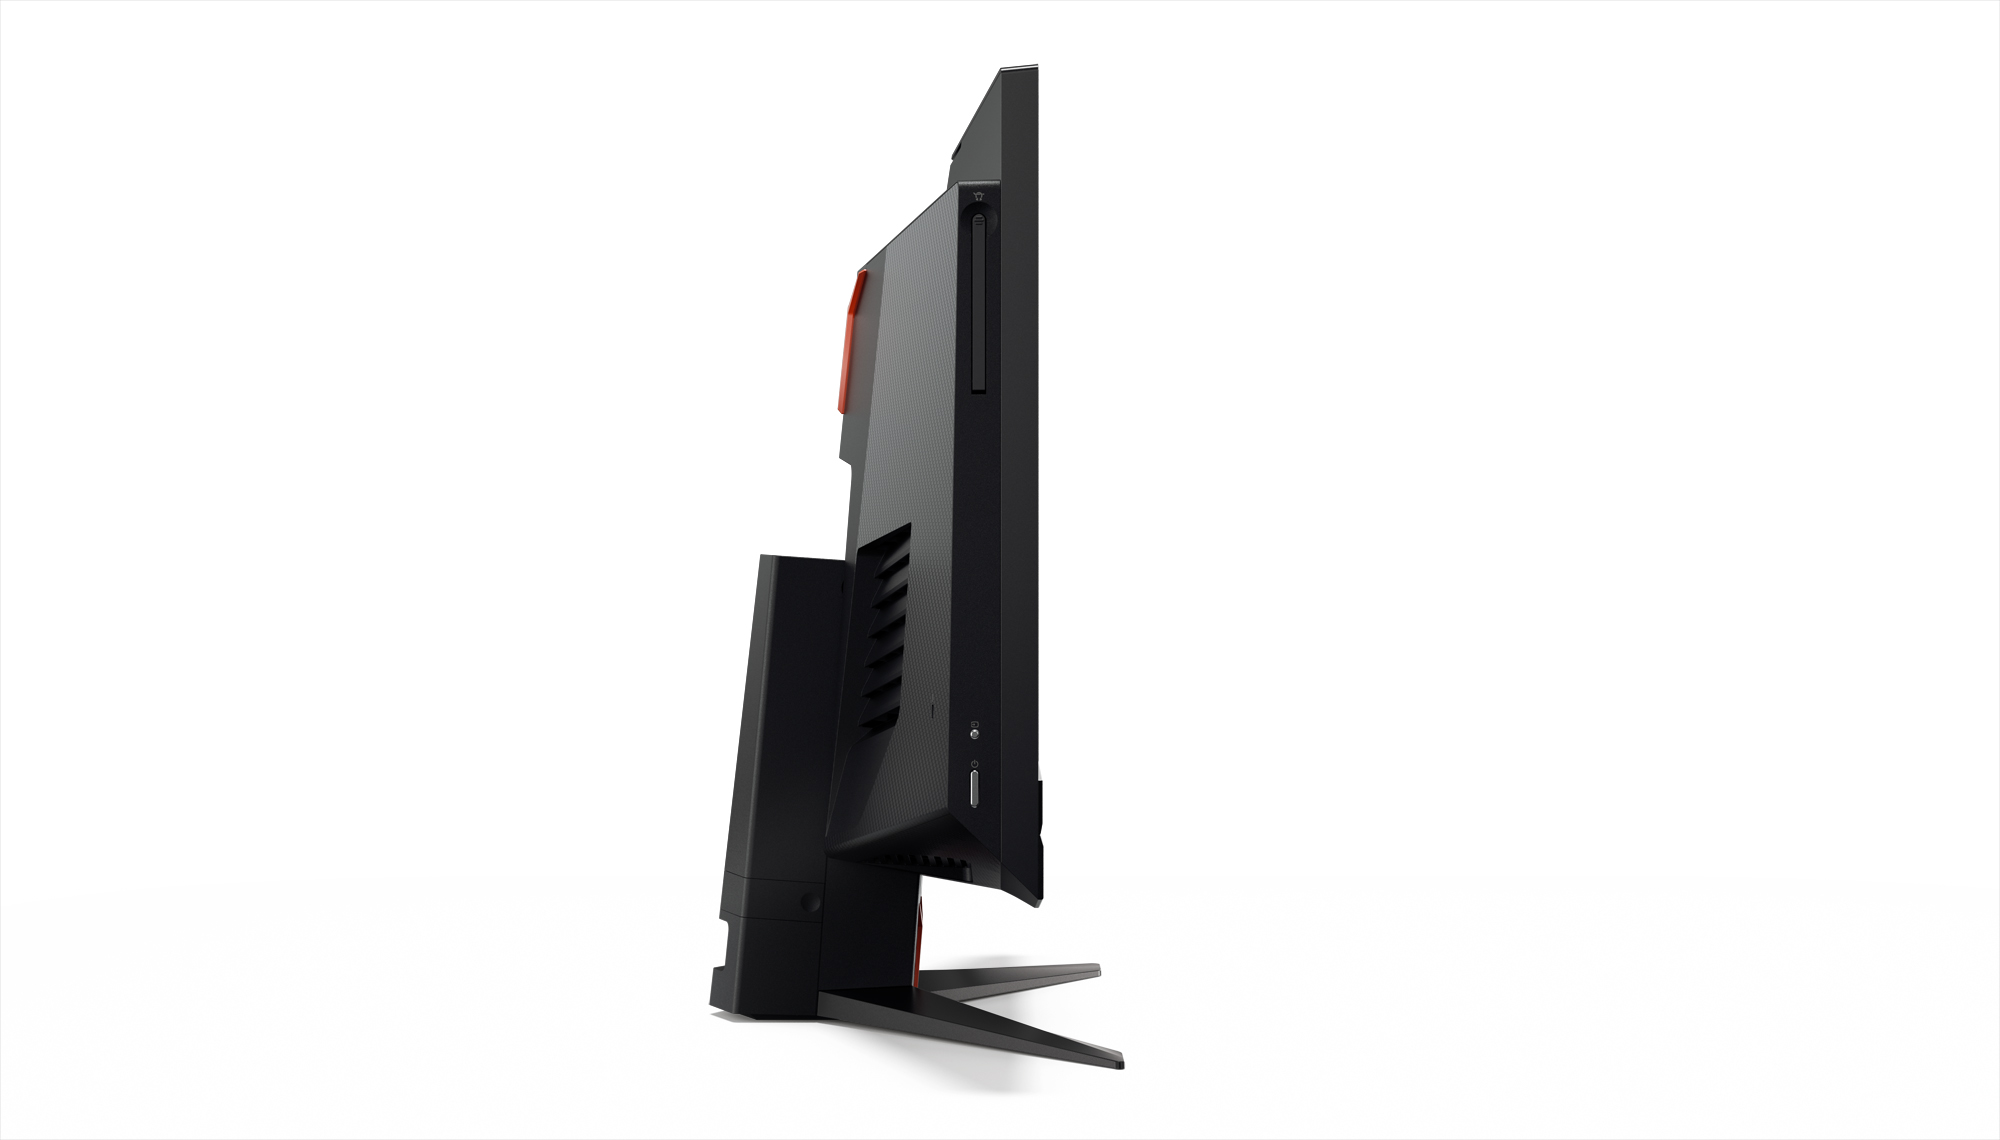 The Lenovo IdeaCentre AIO Y910 with keyboard and mouse for gaming and productivity